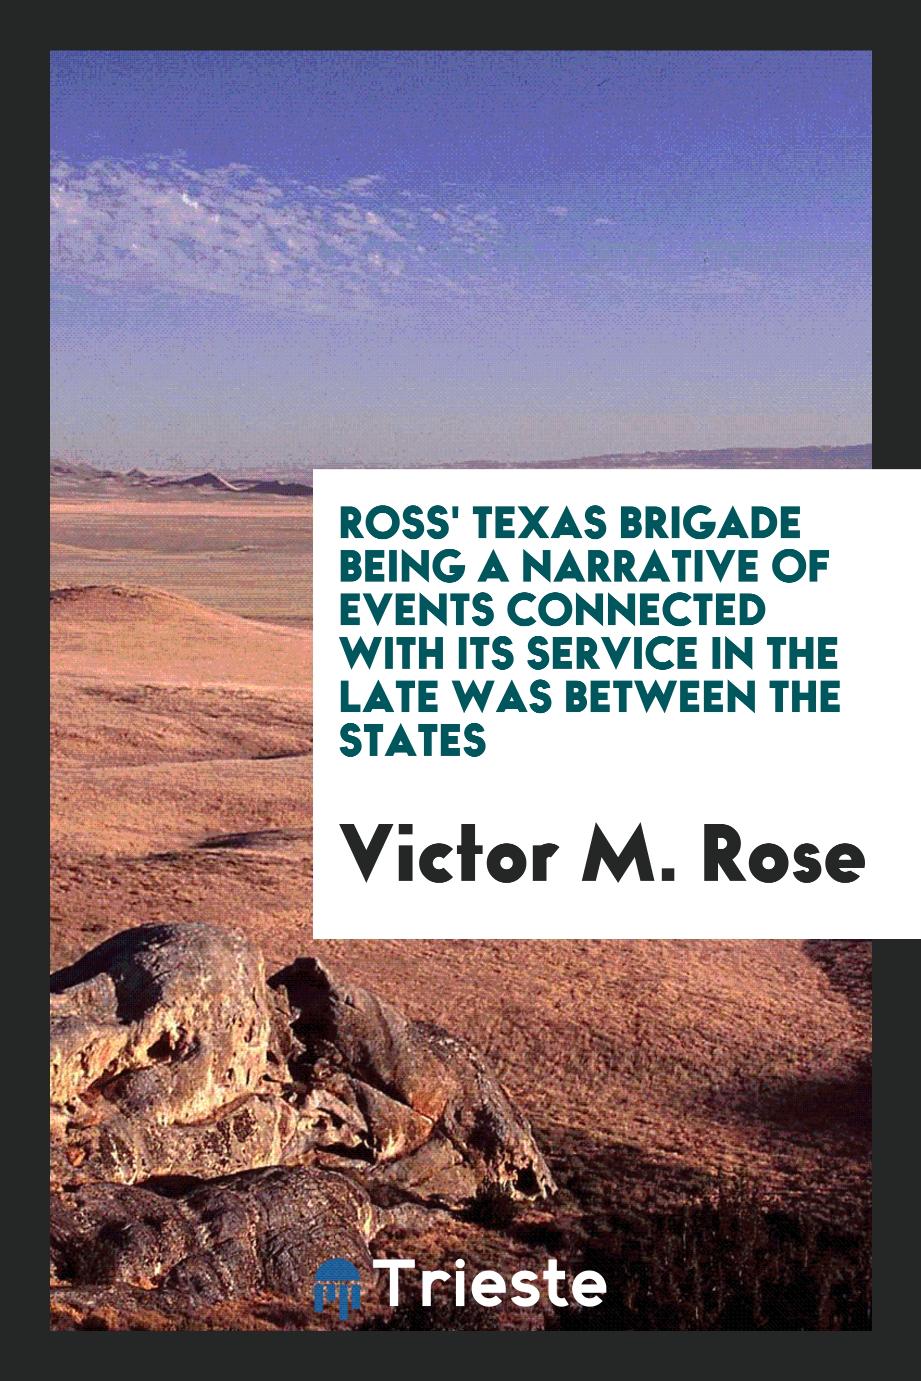 Ross' Texas brigade being a narrative of events connected with its service in the late was between the states